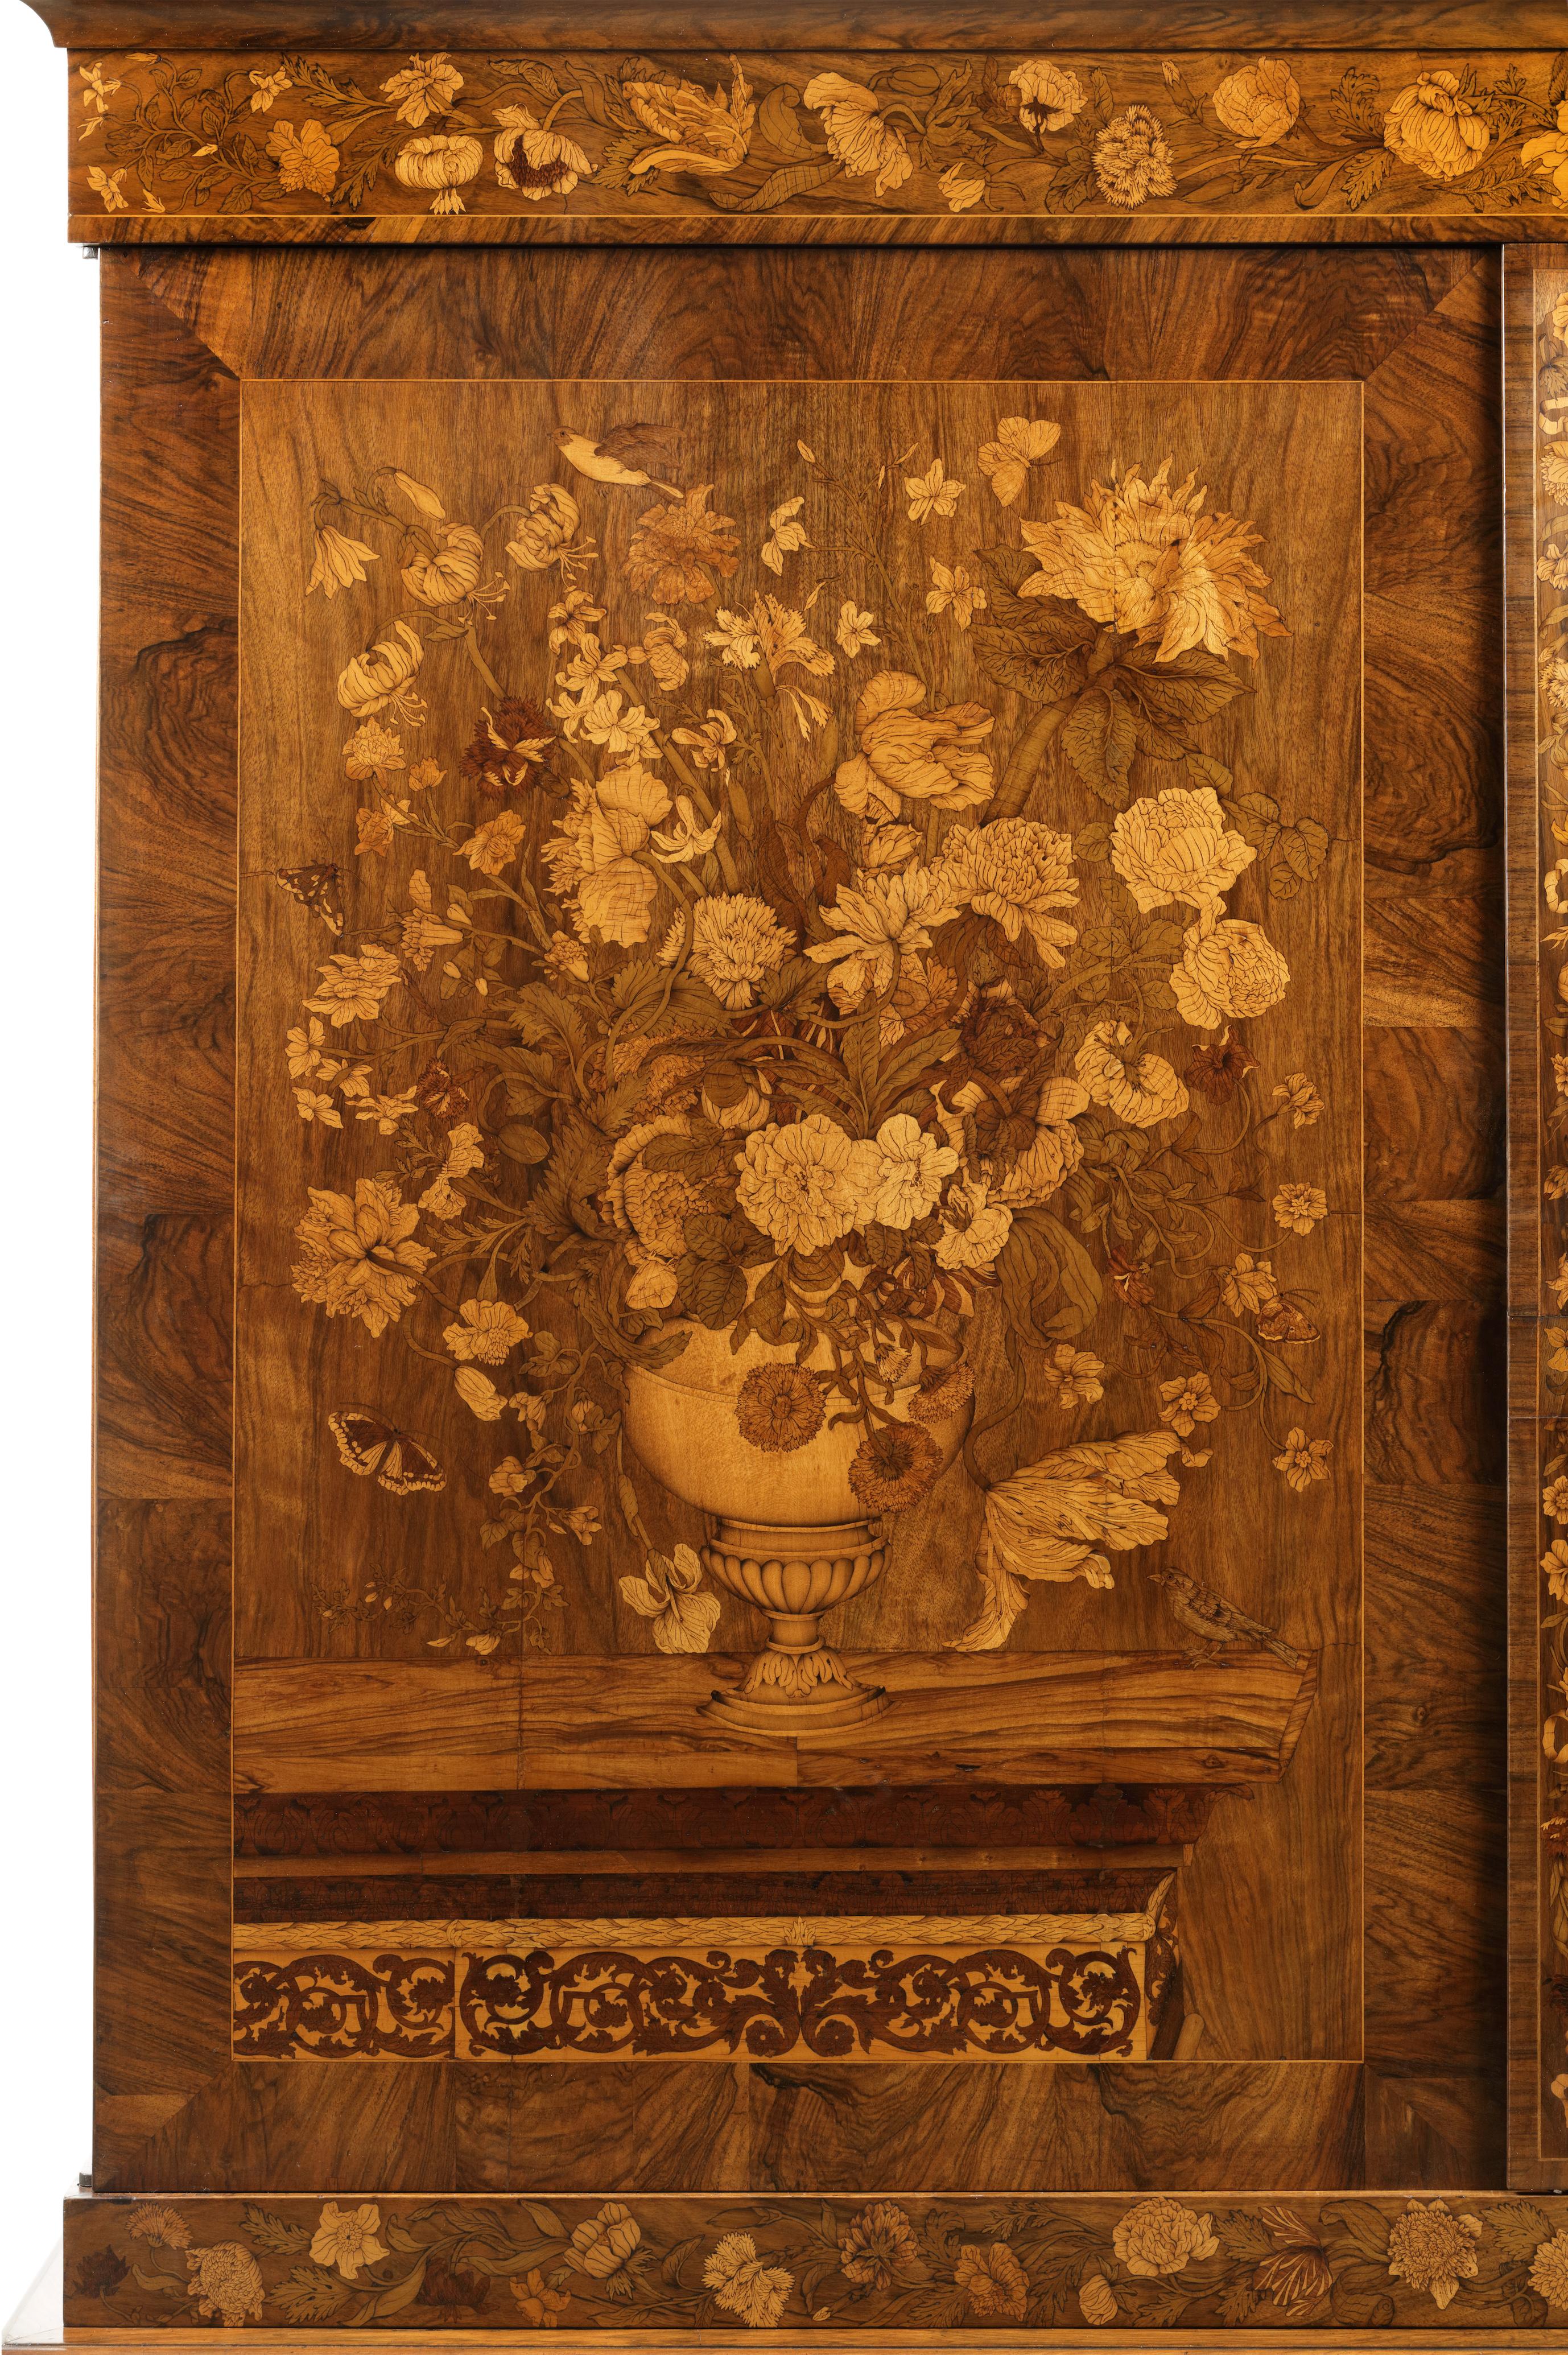 The Van Mekeren cabinet:
A Newly Discovered Pinnacle by the Master of Marquetry


The highly important Dutch marquetry Van Mekeren cabinet

Amsterdam, circa 1700, by Jan van Mekeren (1658-1733)

Measures: H. 206 x W. 171 x D. 61 cm

The